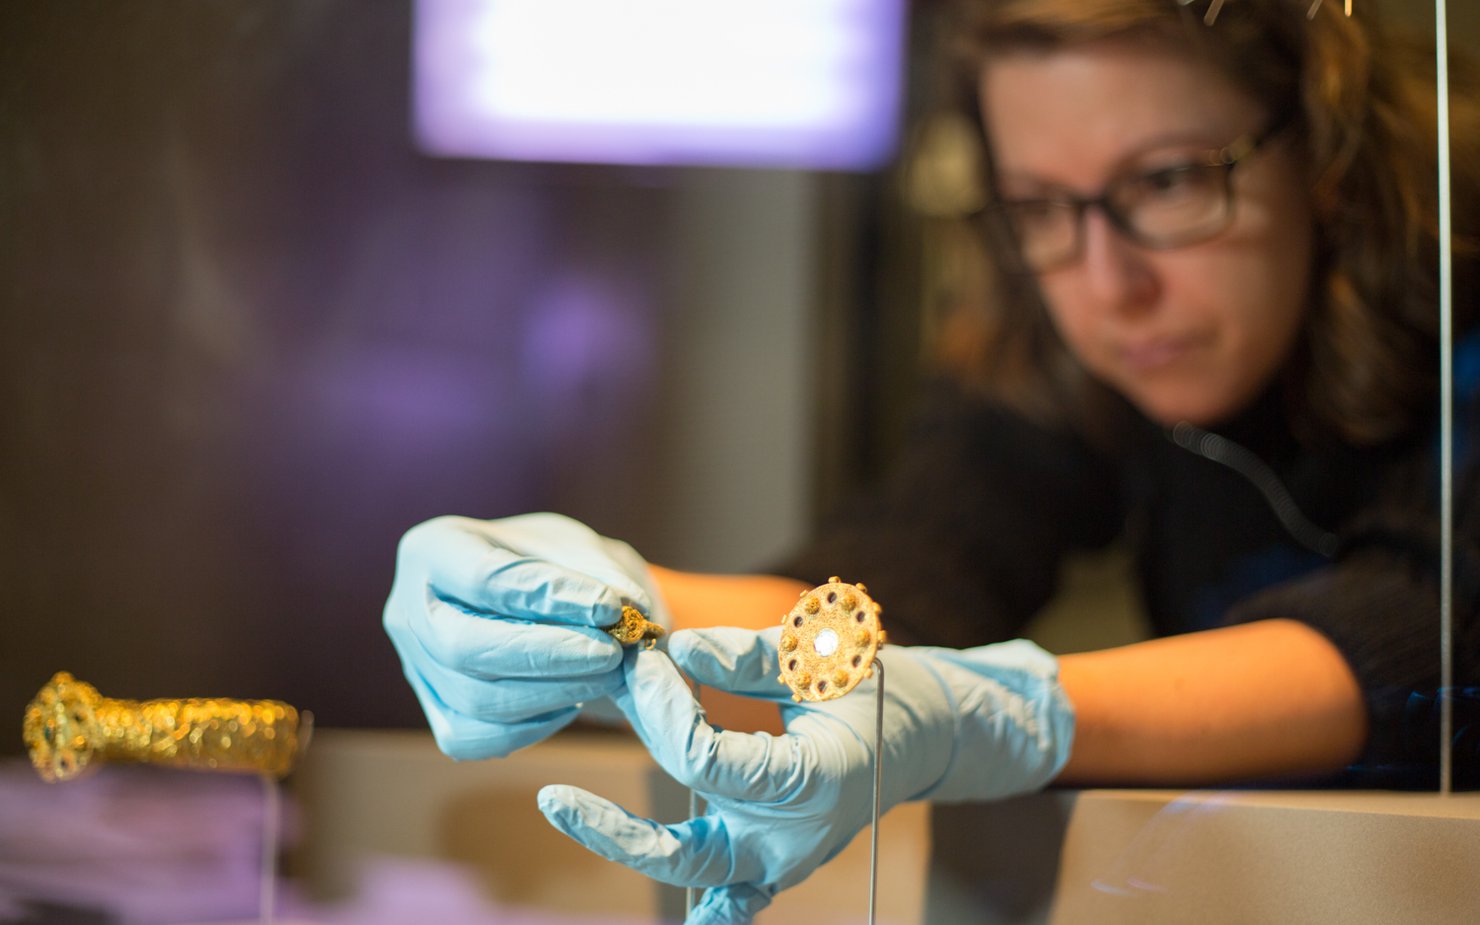 A woman wearing gloves concentrates on placing a small gold jewel inside a glass display